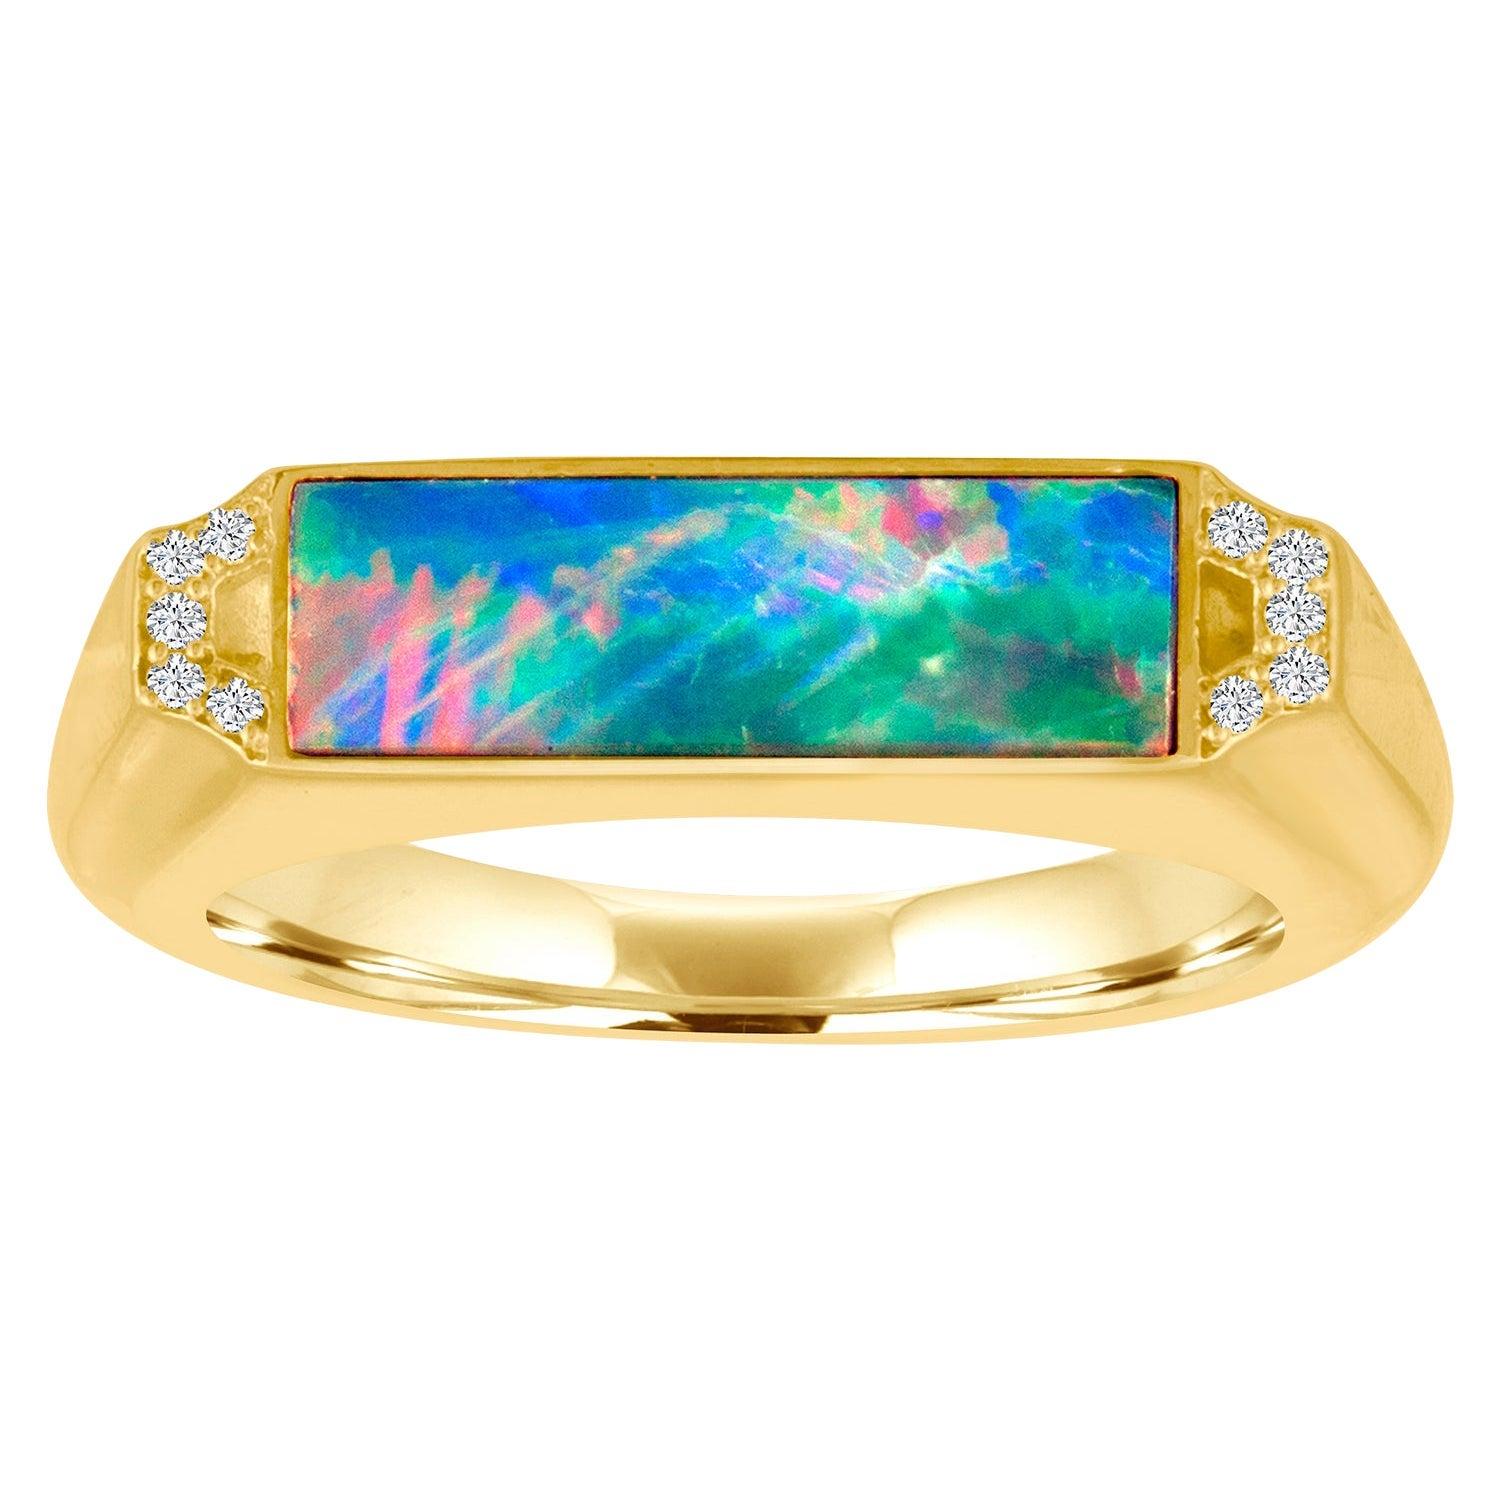 For Sale:  18 Karat Gold Signet Ring with Diamonds and Boulder Opal